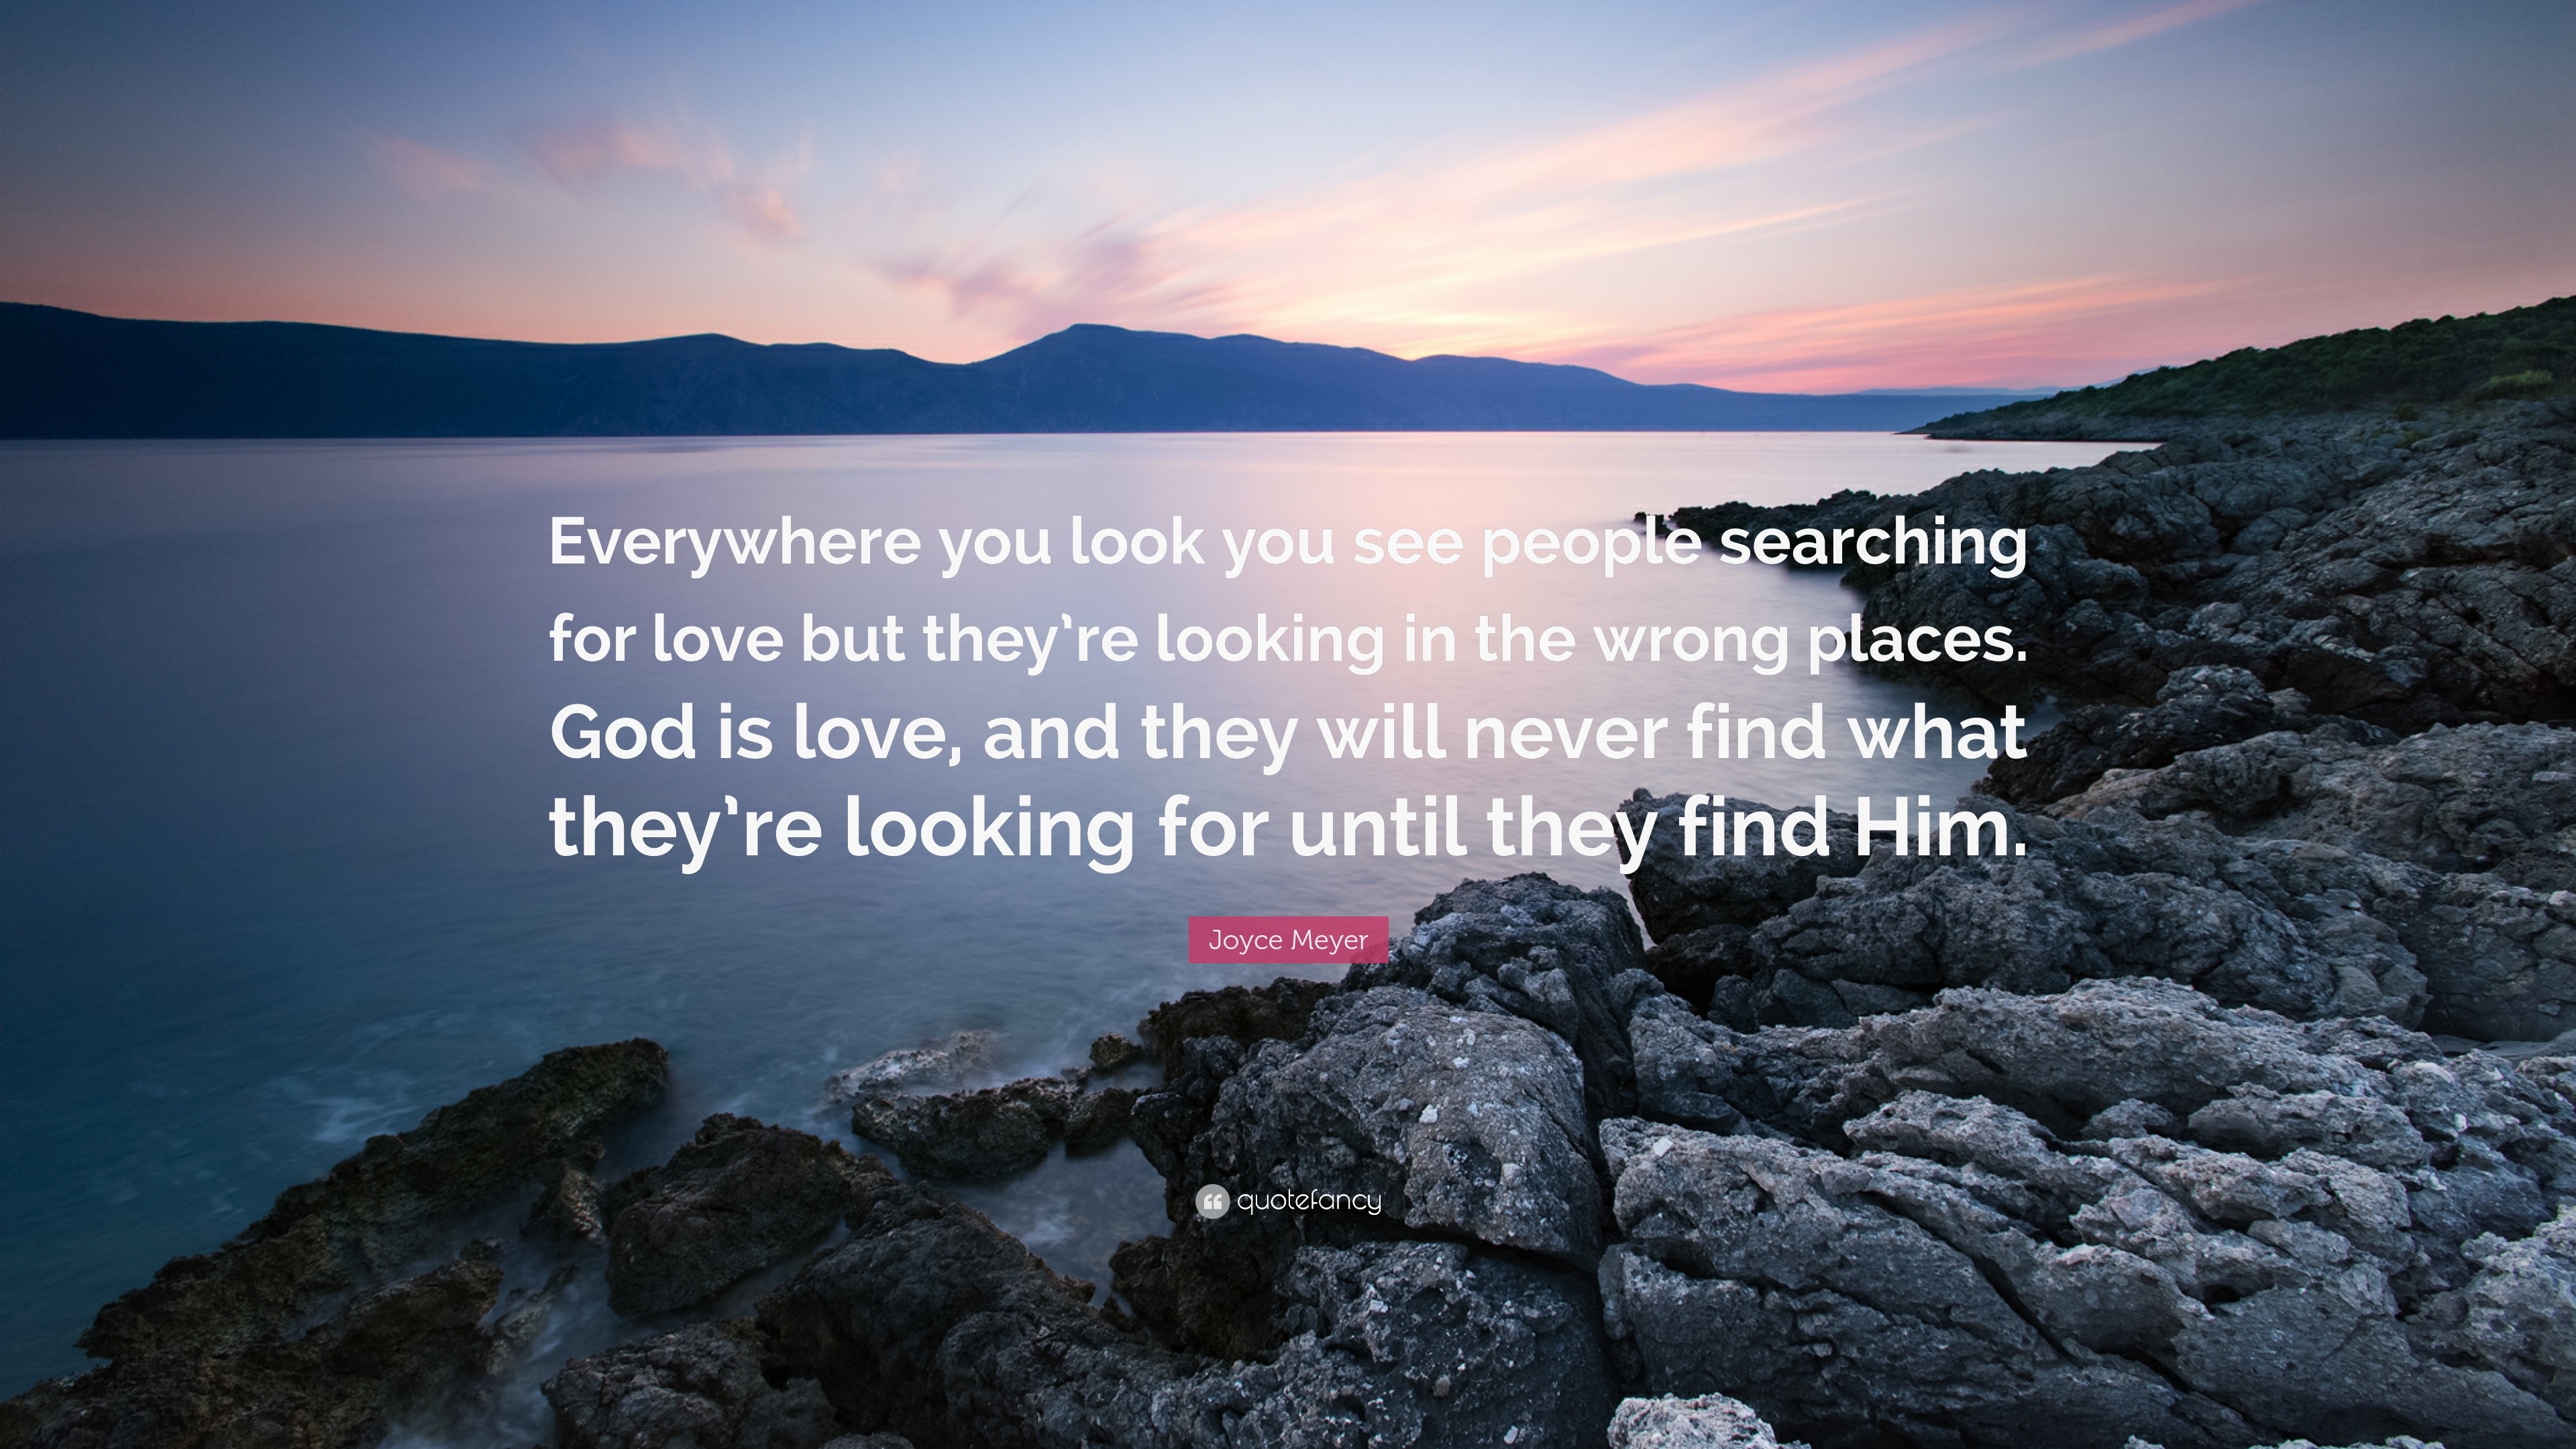 Joyce Meyer Quote Everywhere You Look You See People Searching For Love But They Re Looking In The Wrong Places God Is Love And They Wil 12 Wallpapers Quotefancy